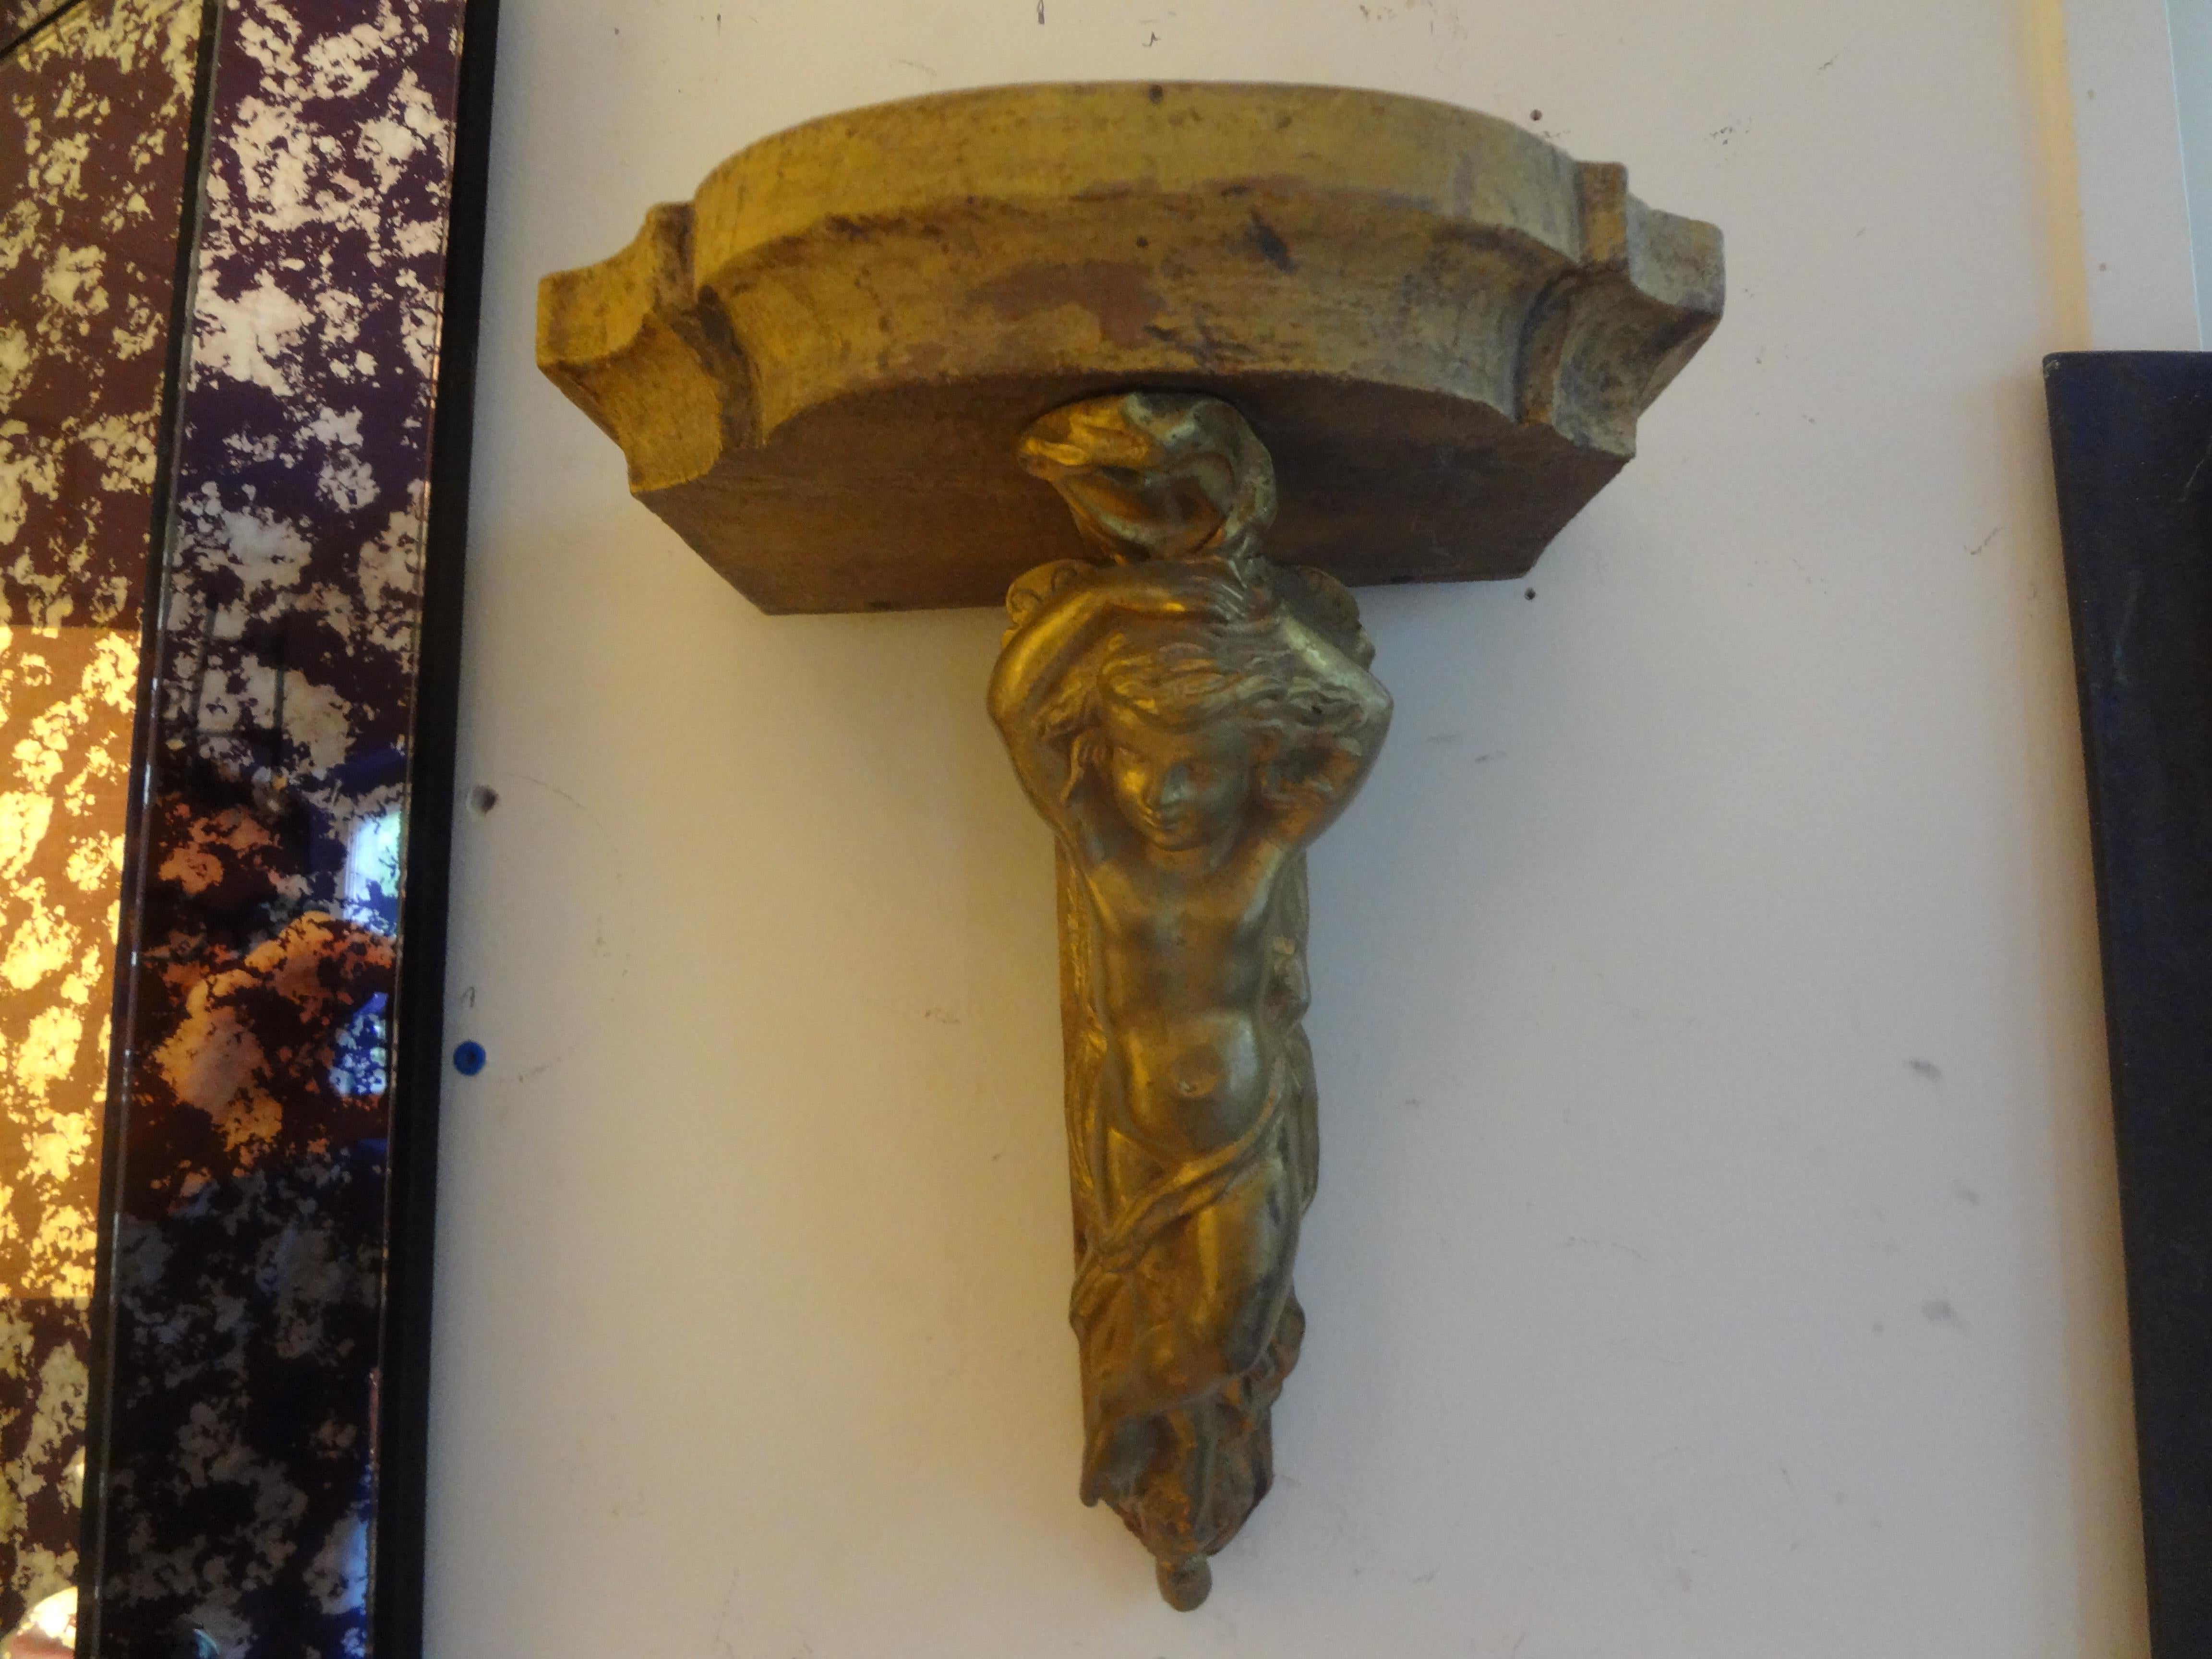 Interesting pair of antique French Napoleon III gilt bronze and wood wall shelves or consoles with cherub supports and wood tops. These stunning antique French wall brackets have a good top surface area to accommodate your favorite prized